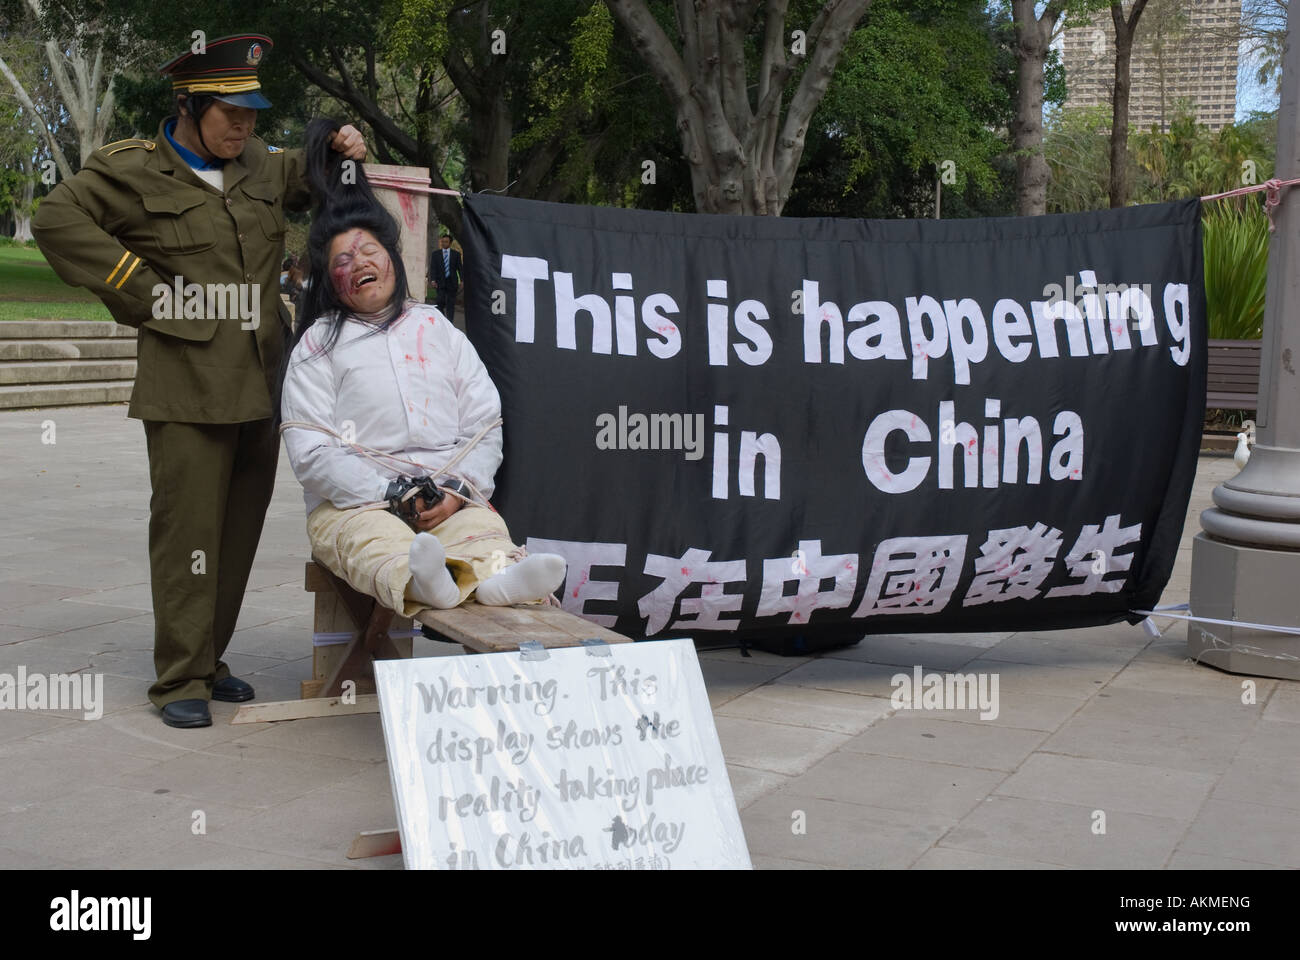 A graphic anti-persecution protest by the Falun Gong aka Falun Dafa, during the APEC summit in Sydney, Australia.                              cesdeh Stock Photo